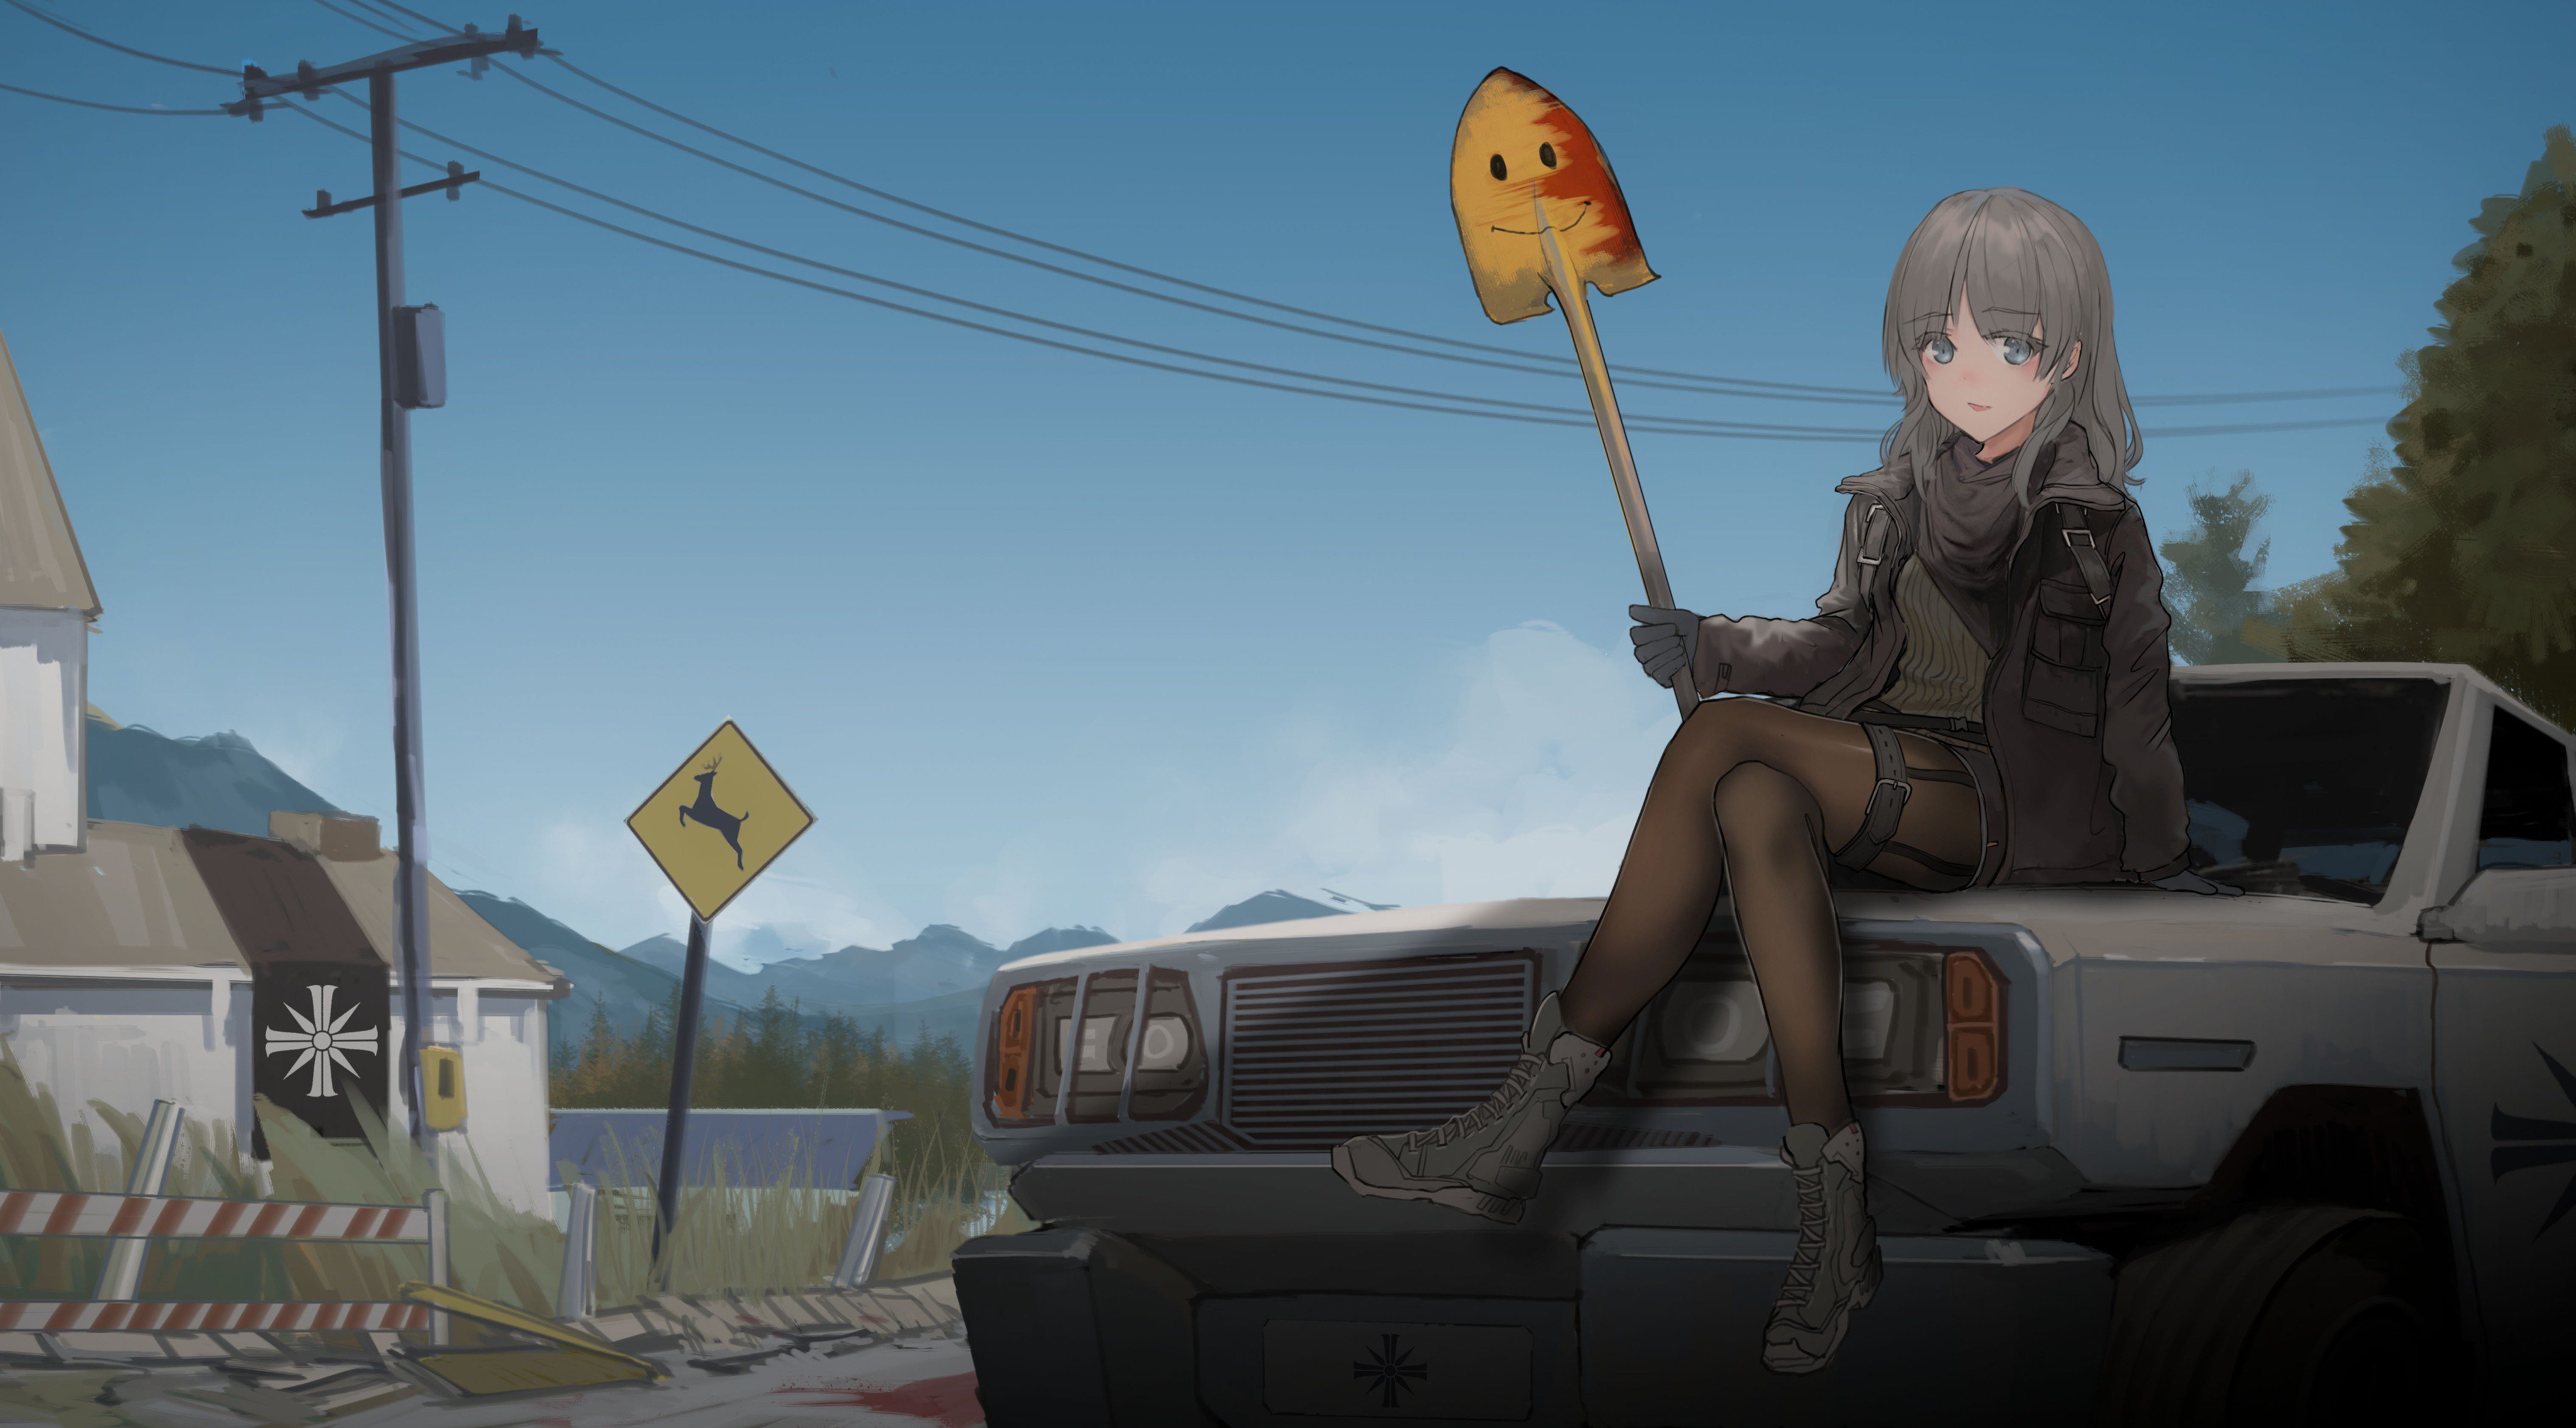 Anime 4096x2270 anime anime girls AegisFate Far Cry 5 shovels smiling car vehicle signs legs crossed